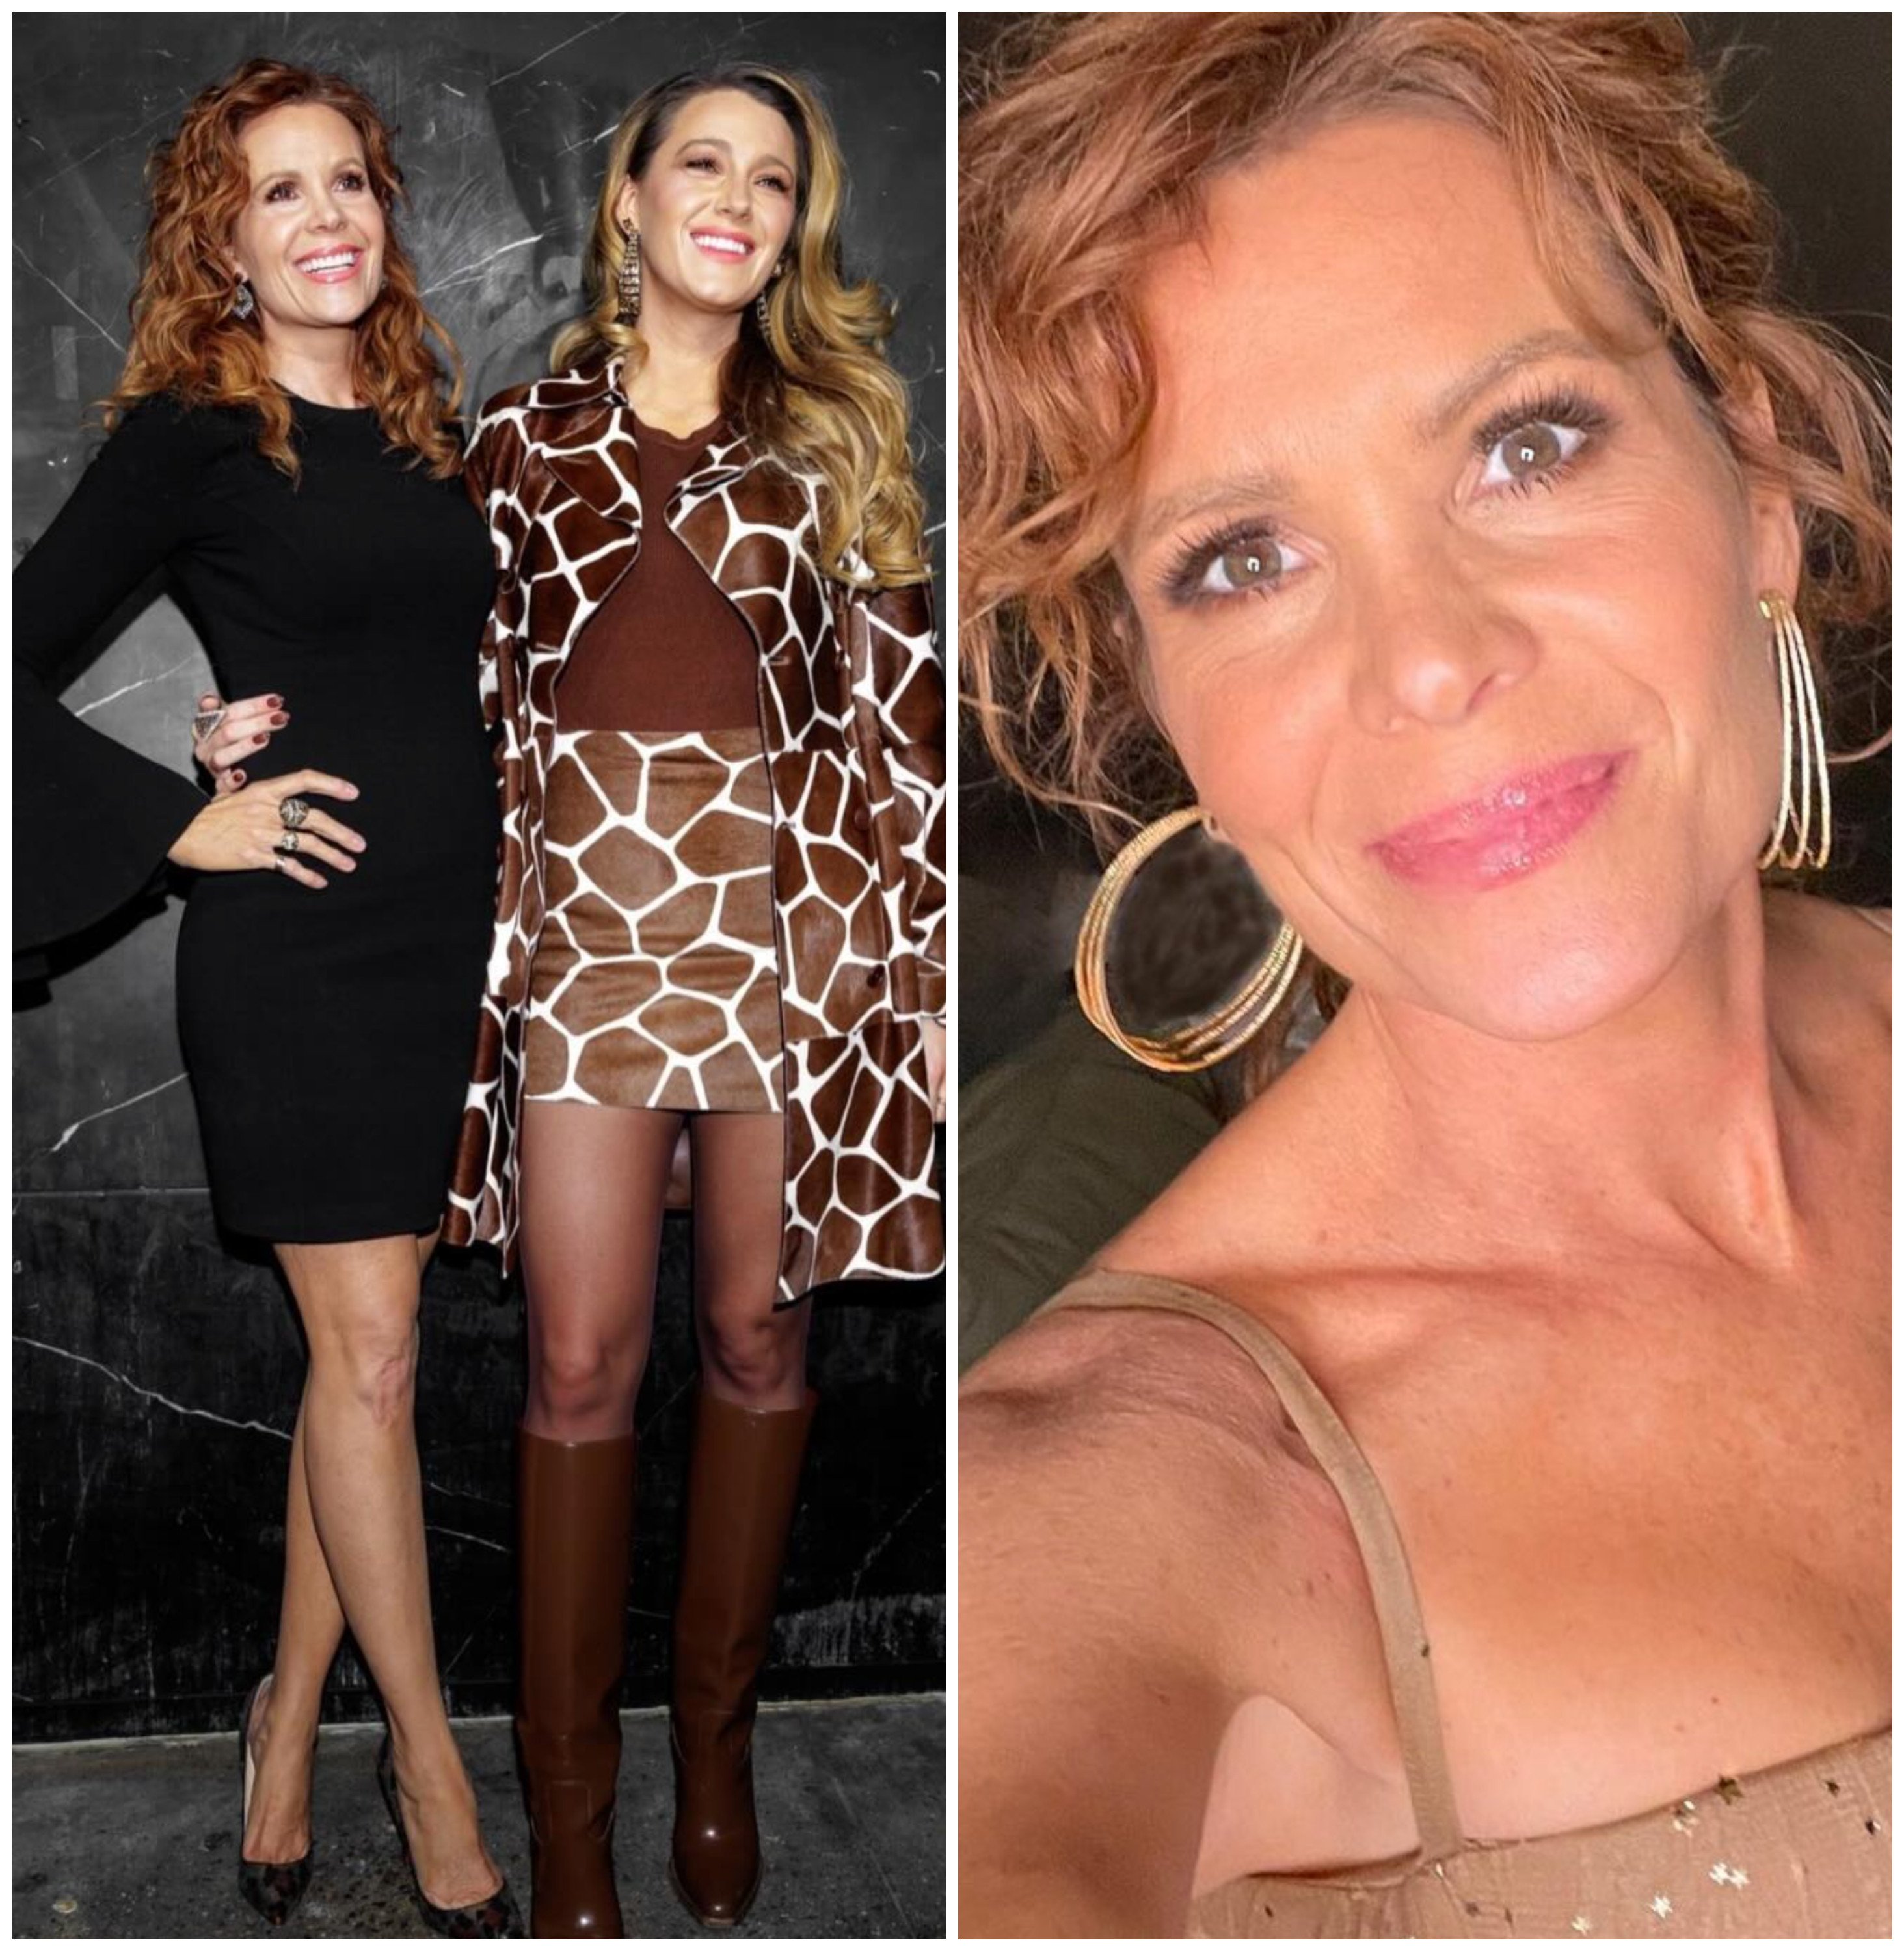 Blake Lively’s sister Robyn is just as glam as the Hollywood icon is. Photos: @robynlively/Instagram